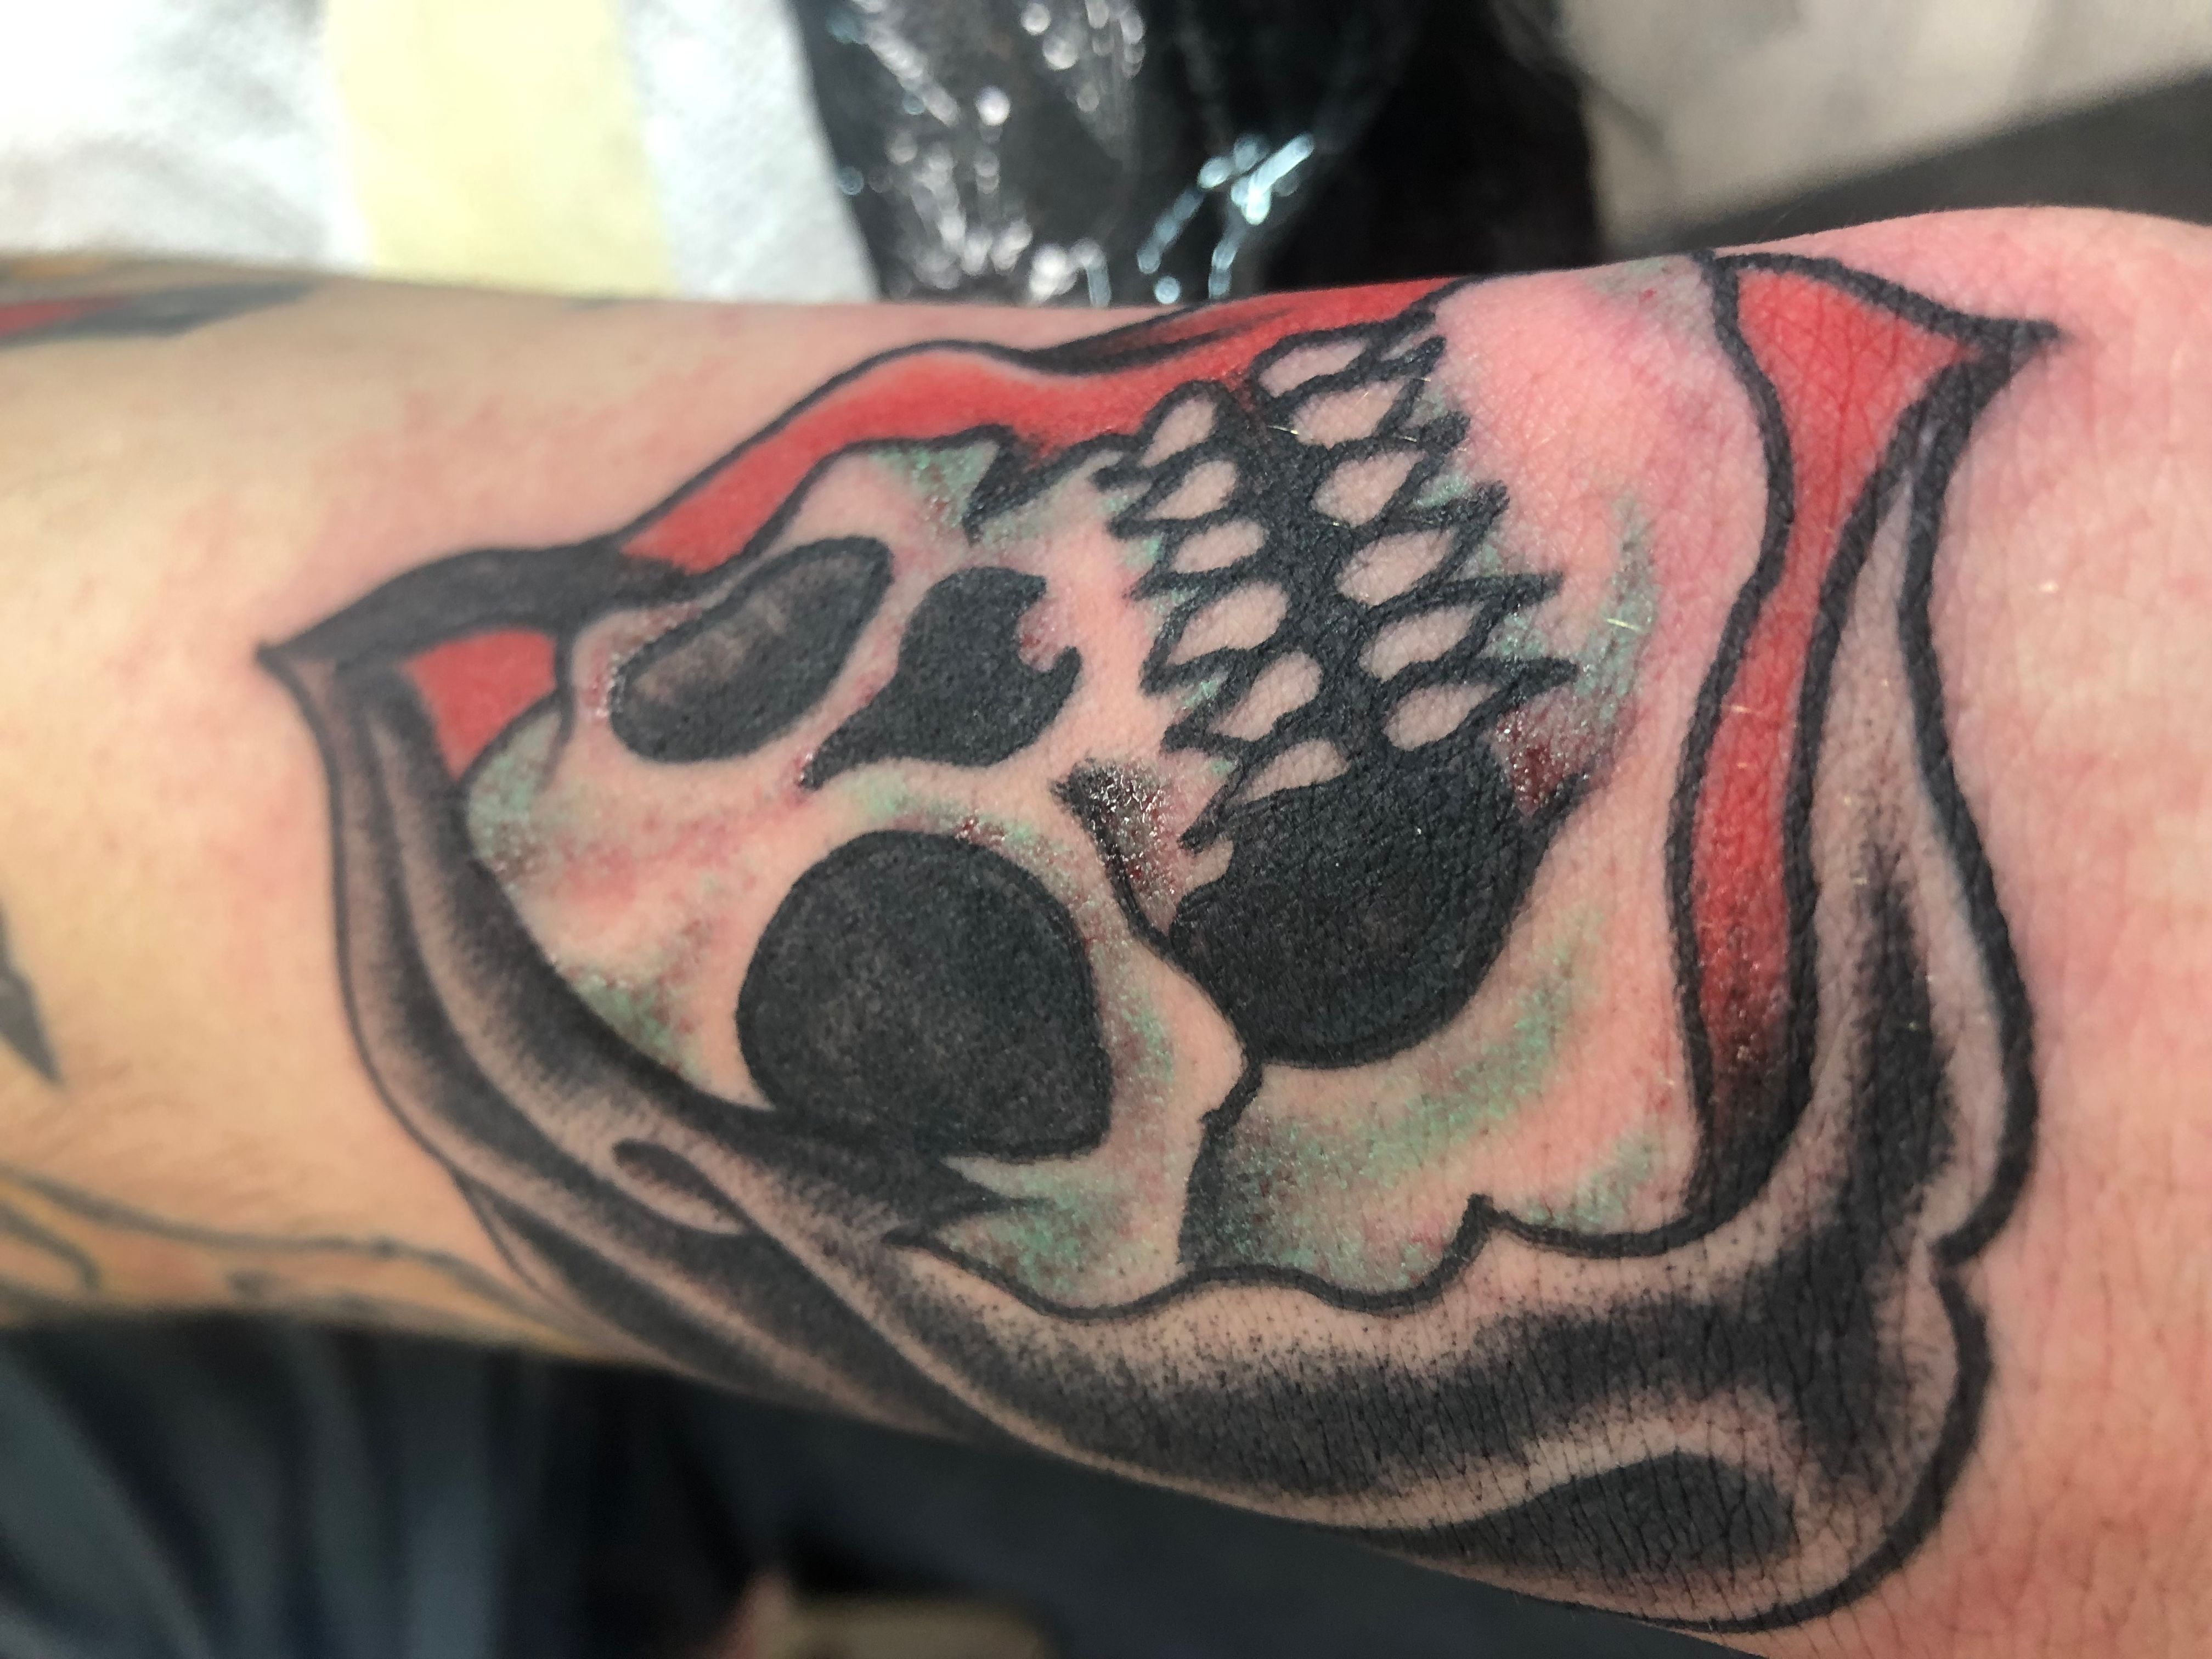 American Outlaw Tattoo parlor in Amherst fulfilling resolutions one body  art at a time – Morning Journal